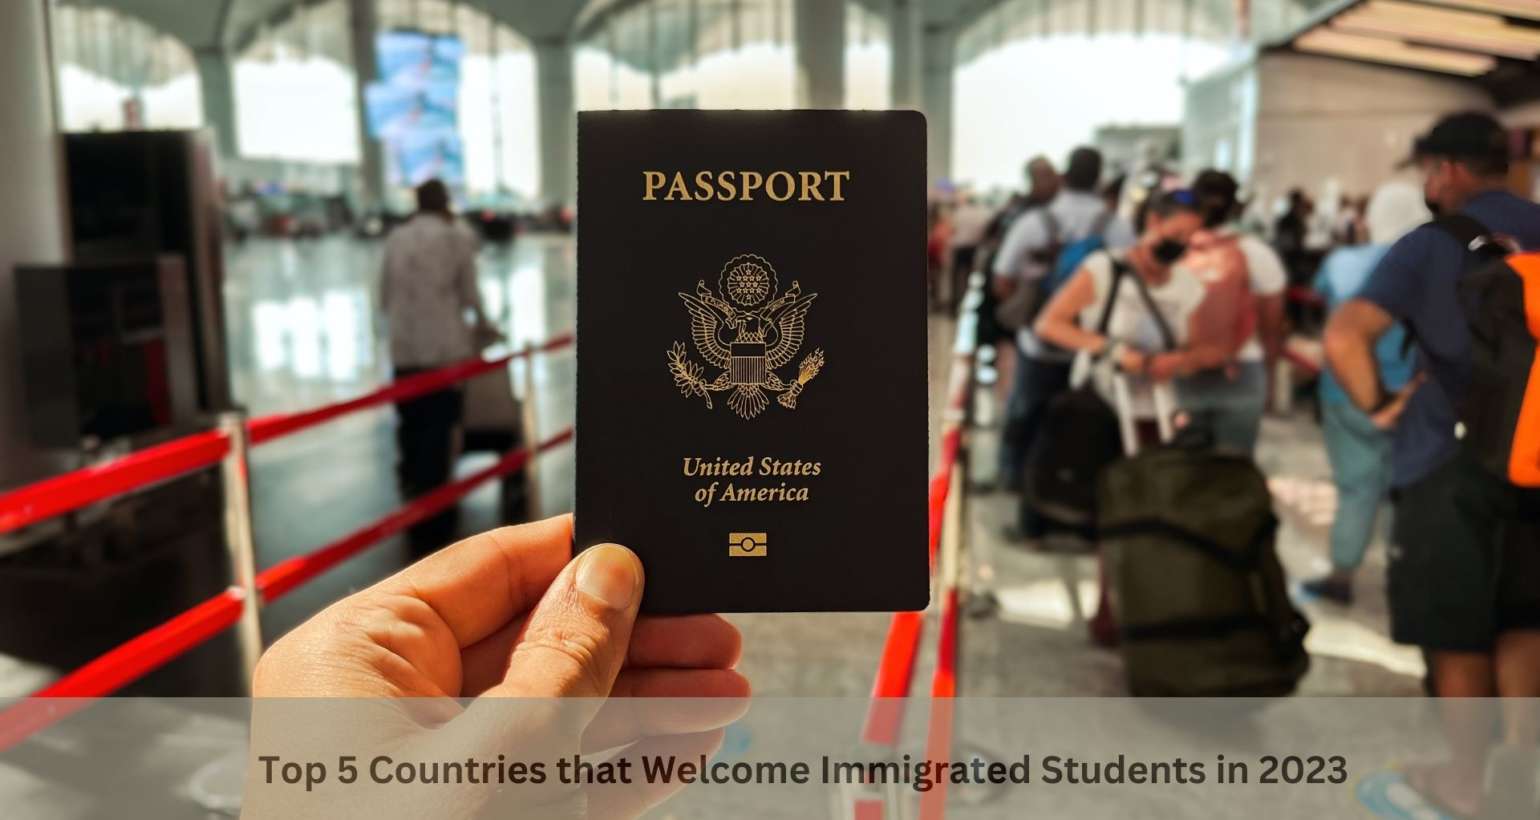 Top 5 Countries that Welcome Immigrated Students in 2023